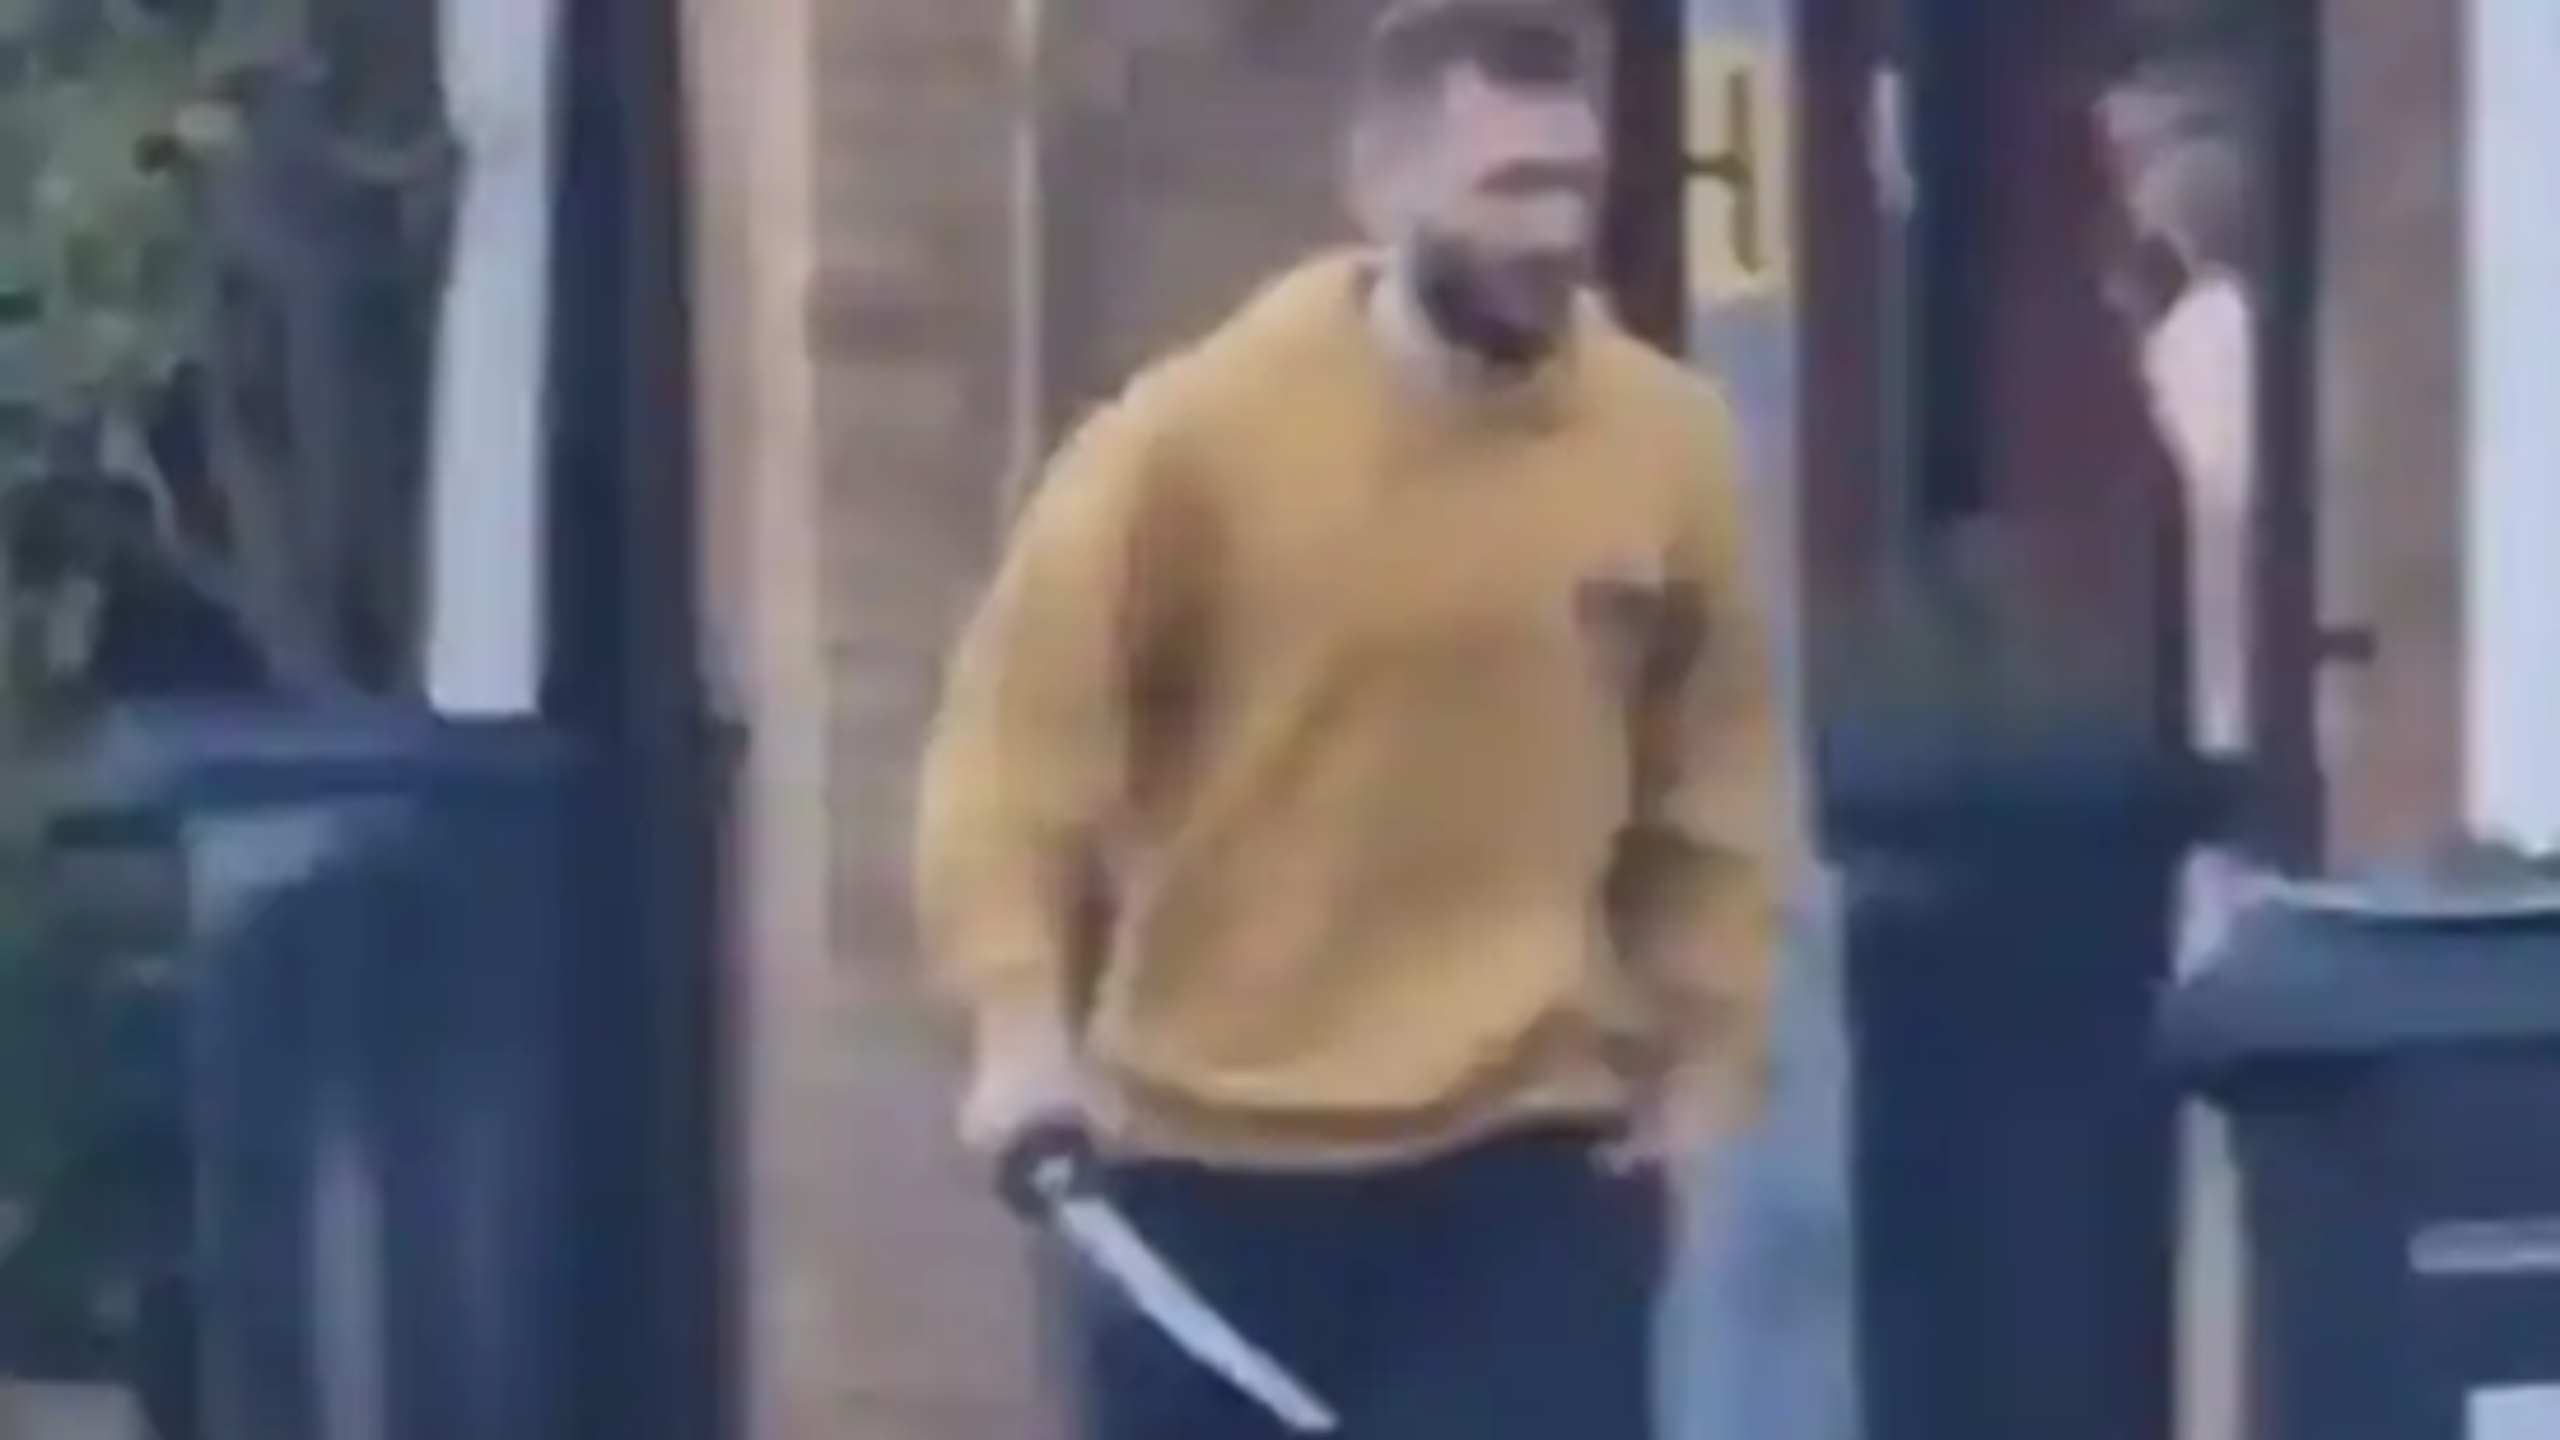 Man with Sword arrested after London Tube Station Stabbing Spree